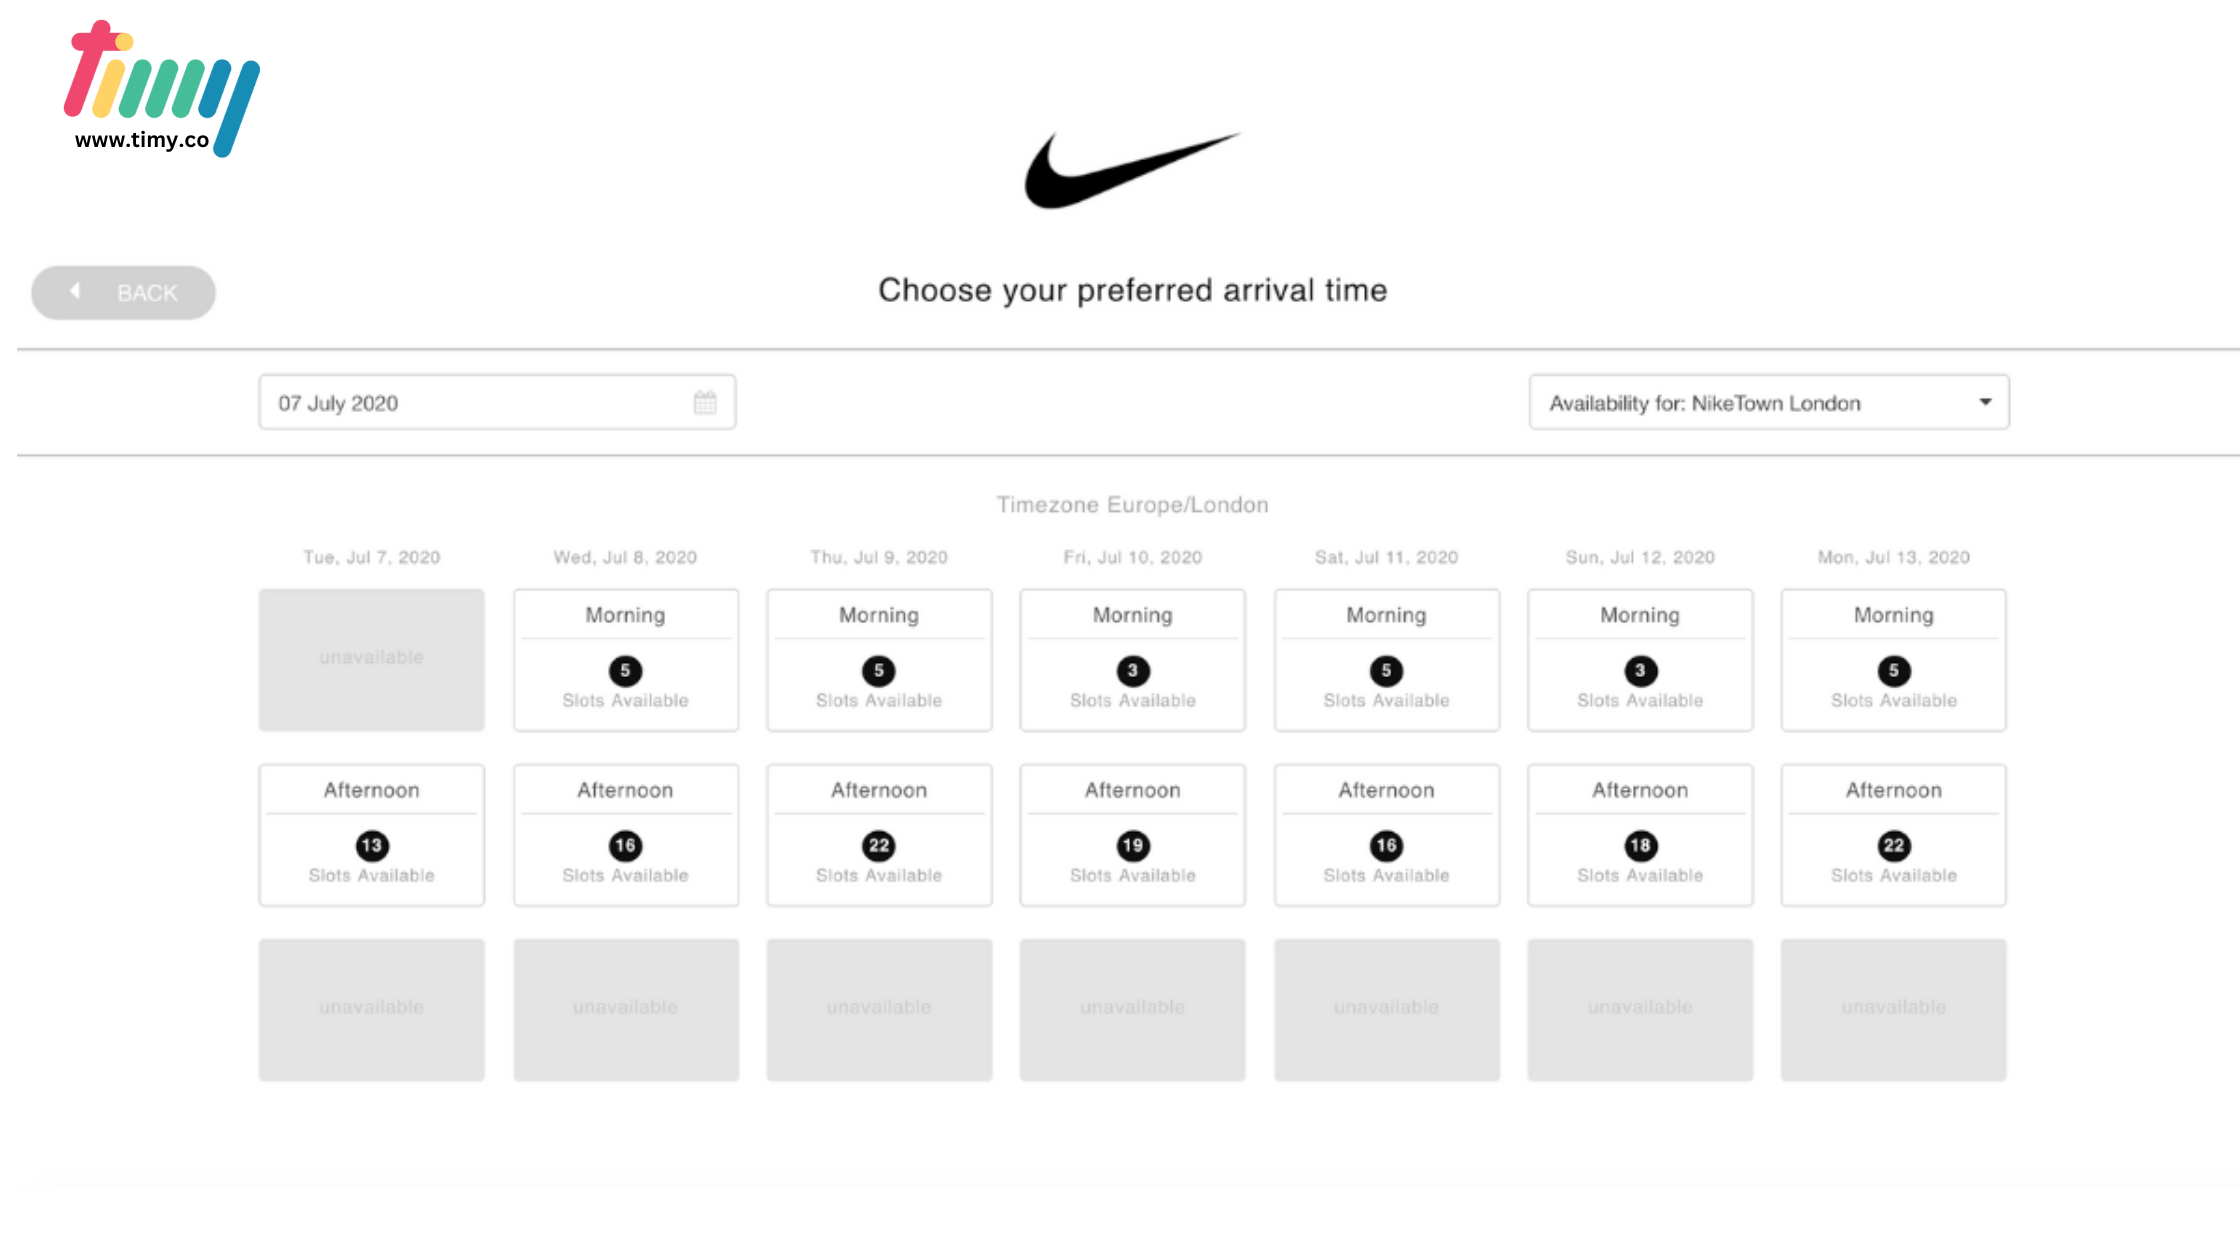 The solution that Nike has taken to solve the scheduling issue